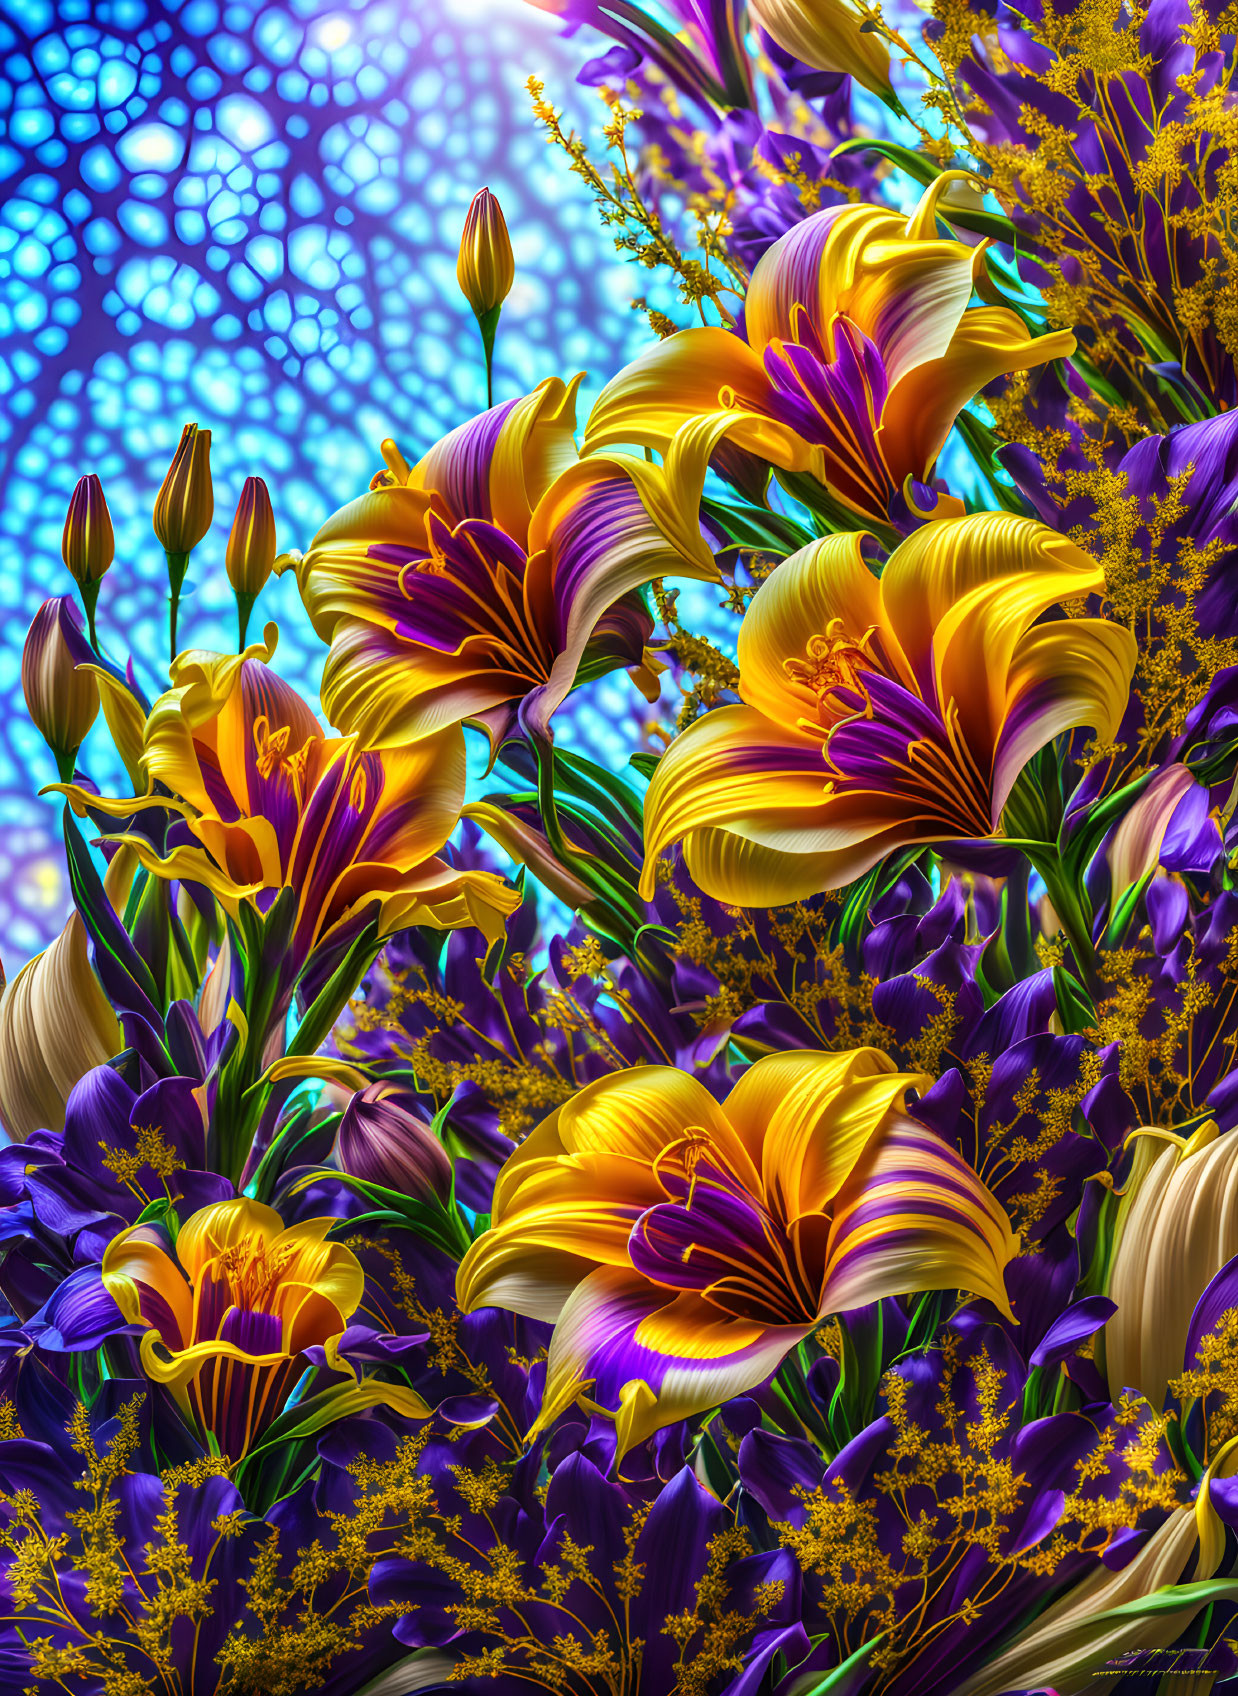 Colorful digital artwork featuring purple and yellow lilies on a blue hexagon-patterned background